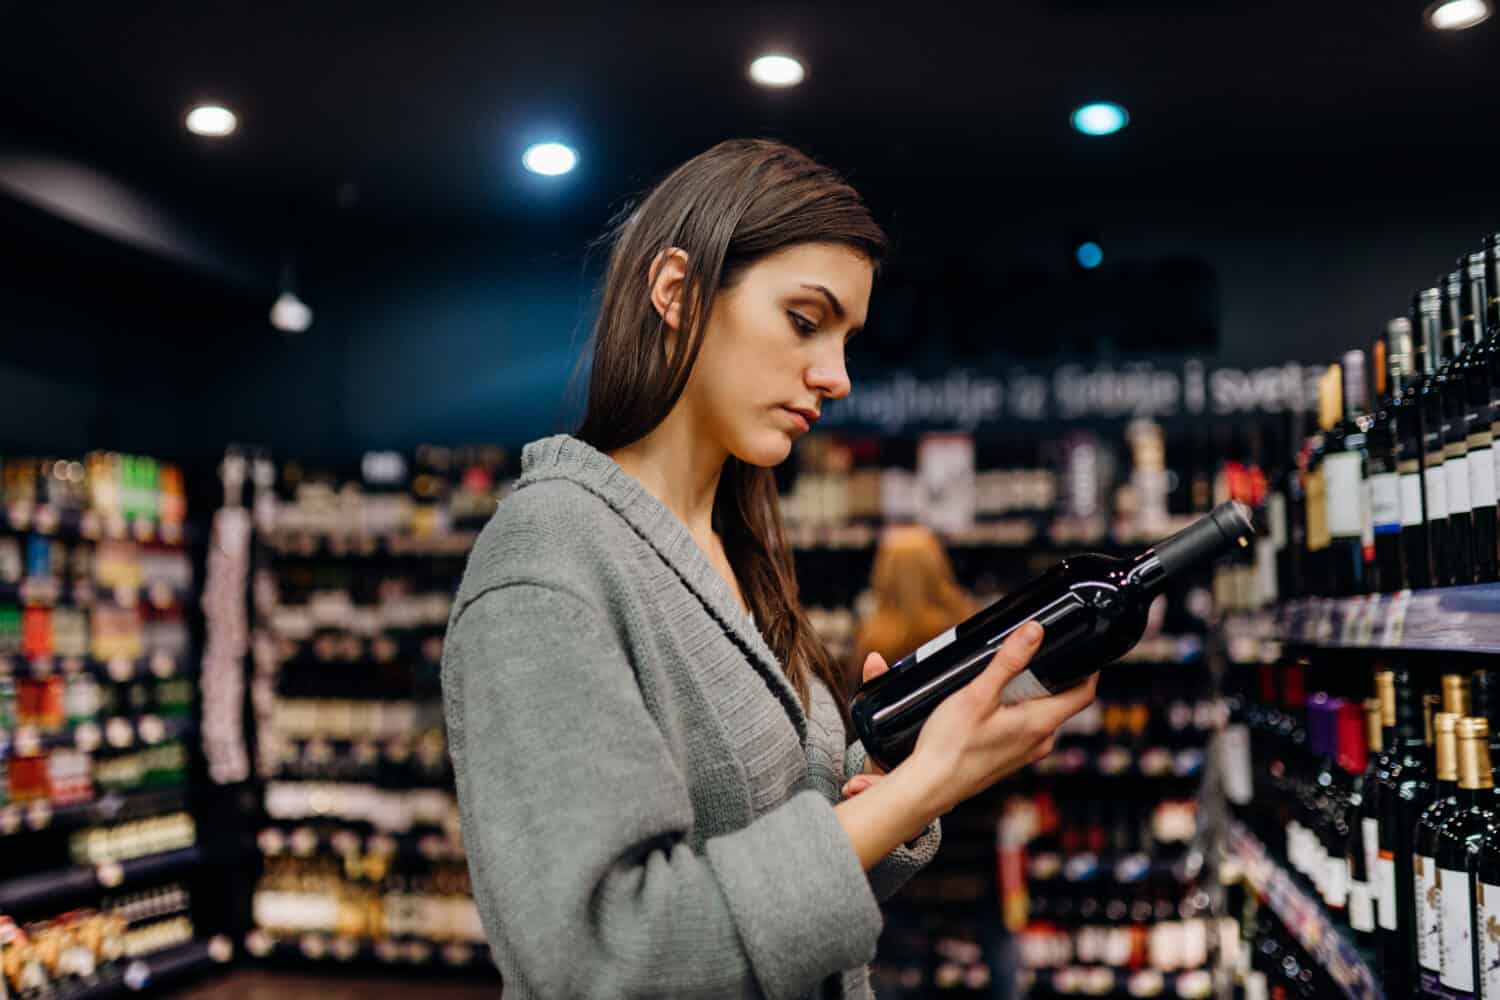 Woman shopping for expensive wine in supermarket alcohol store.Choosing and buying good cheap wine.Benefits of drinking wine.Resveratrol.Everyday binge drinking.Oenology.Mediterranean diet.Alcoholism